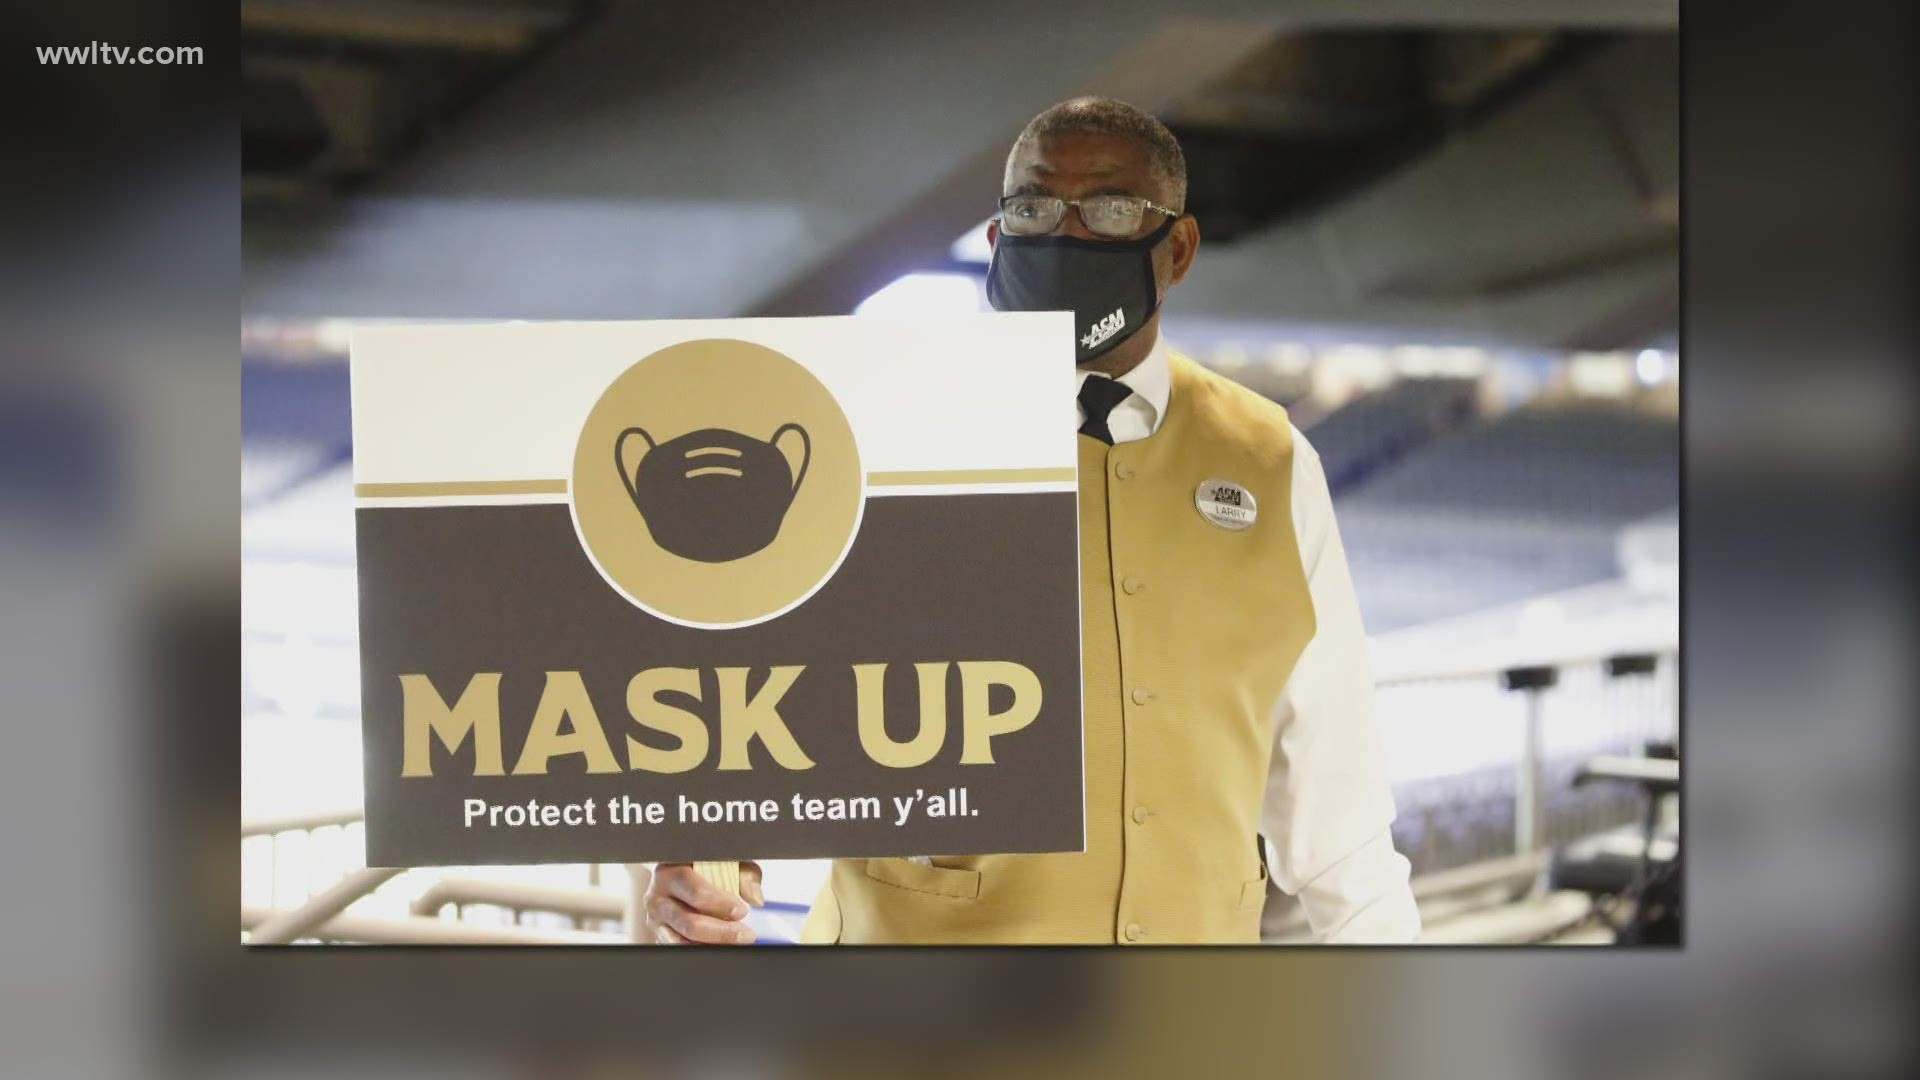 The chairman of the LSED says if the Saints played a football game tomorrow with 100 percent capacity for fans, the city would make the dome mandate masks for all.